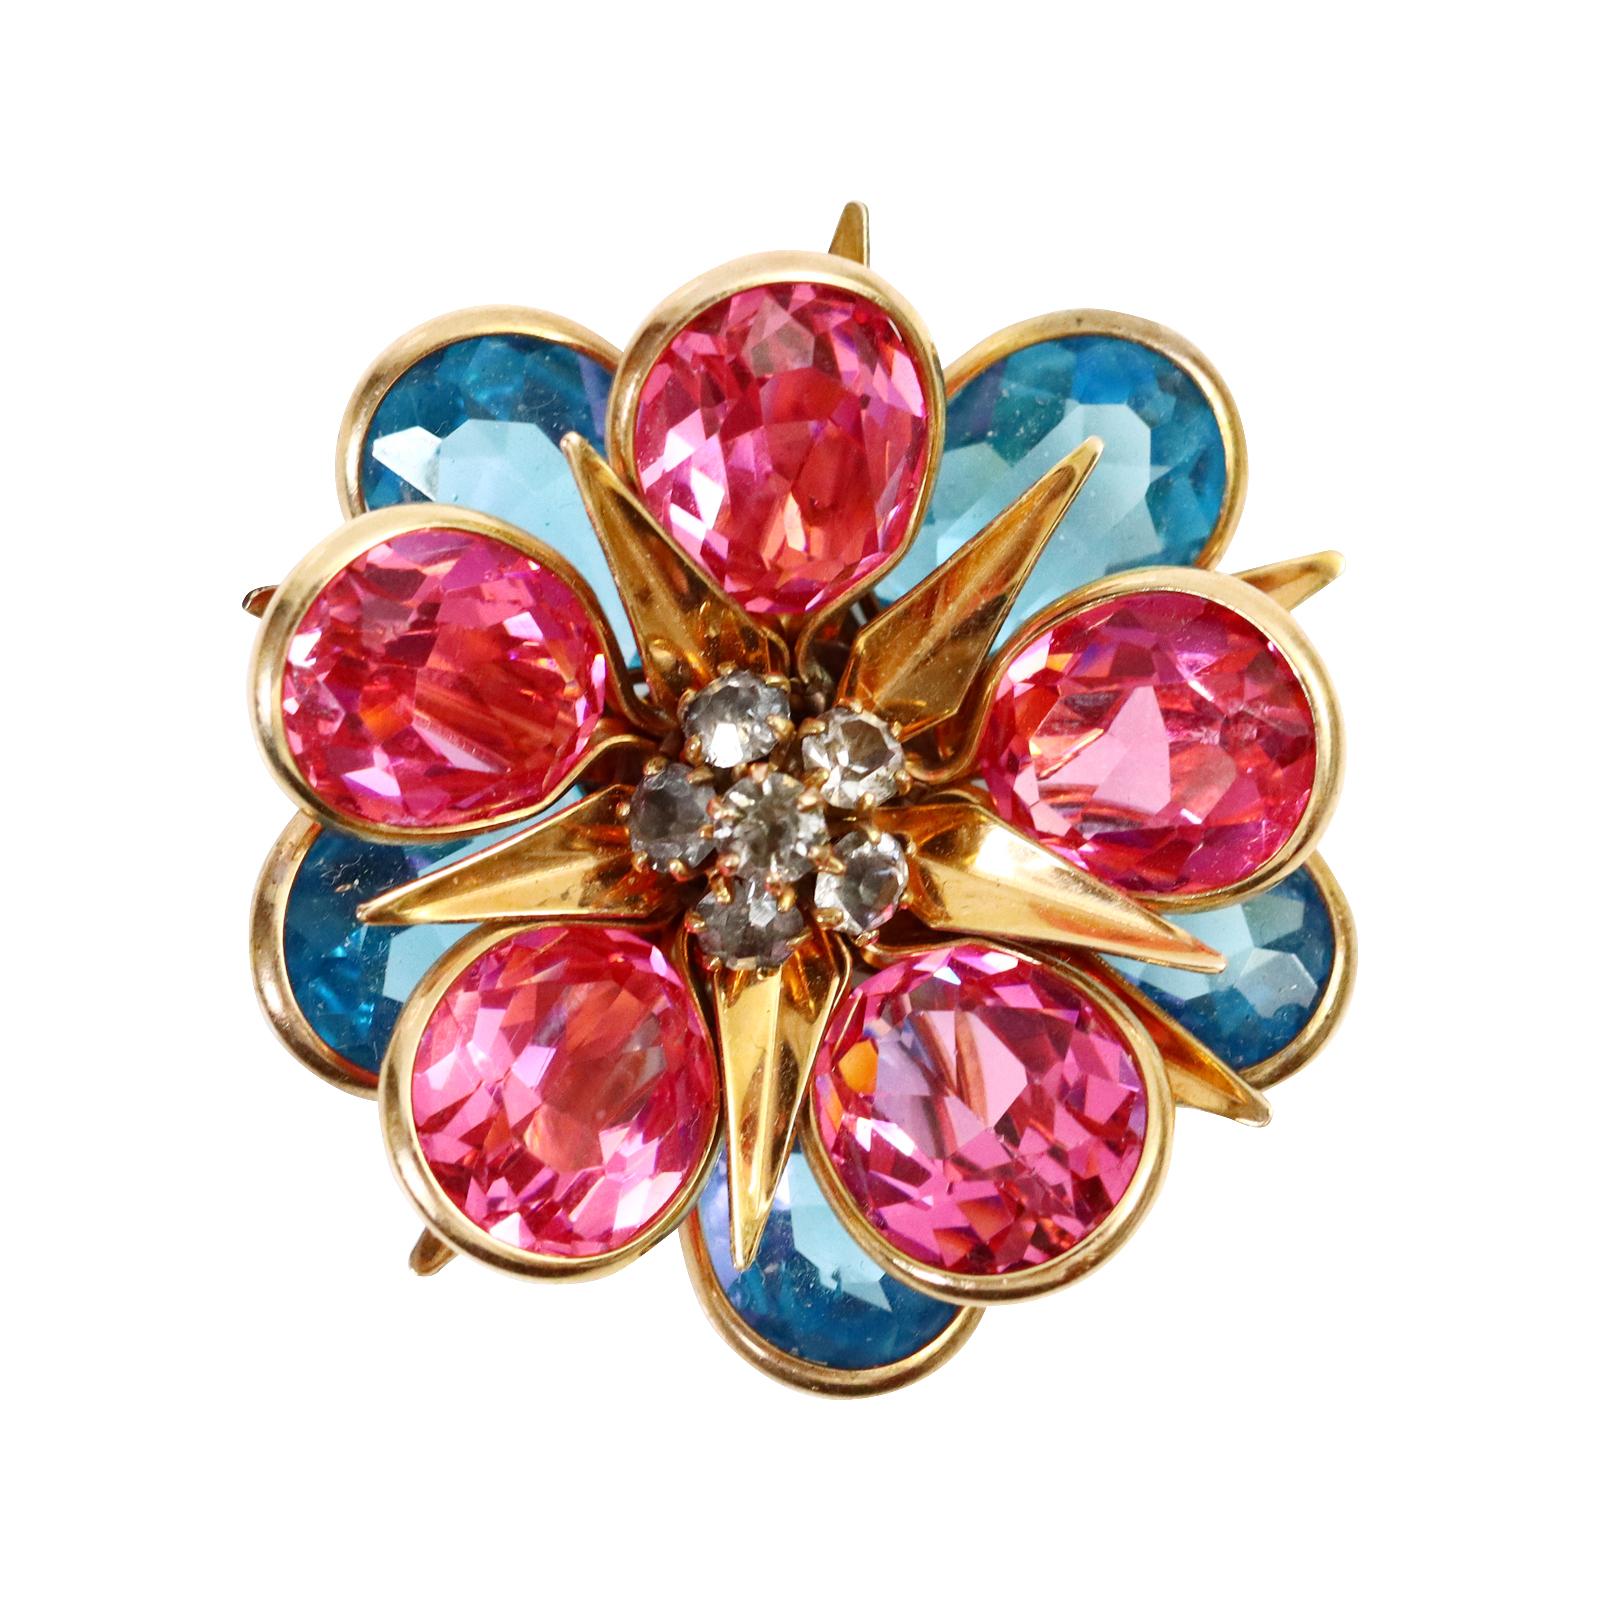 Vintage Blue and Pink Crystal with Grey Stones Brooch Circa 1940s.  This is a very interesting and very well made brooch.  The petals are stacked on top of two tiers of a rose gold color star shaped support.  One layer is blue. The next is pink. 